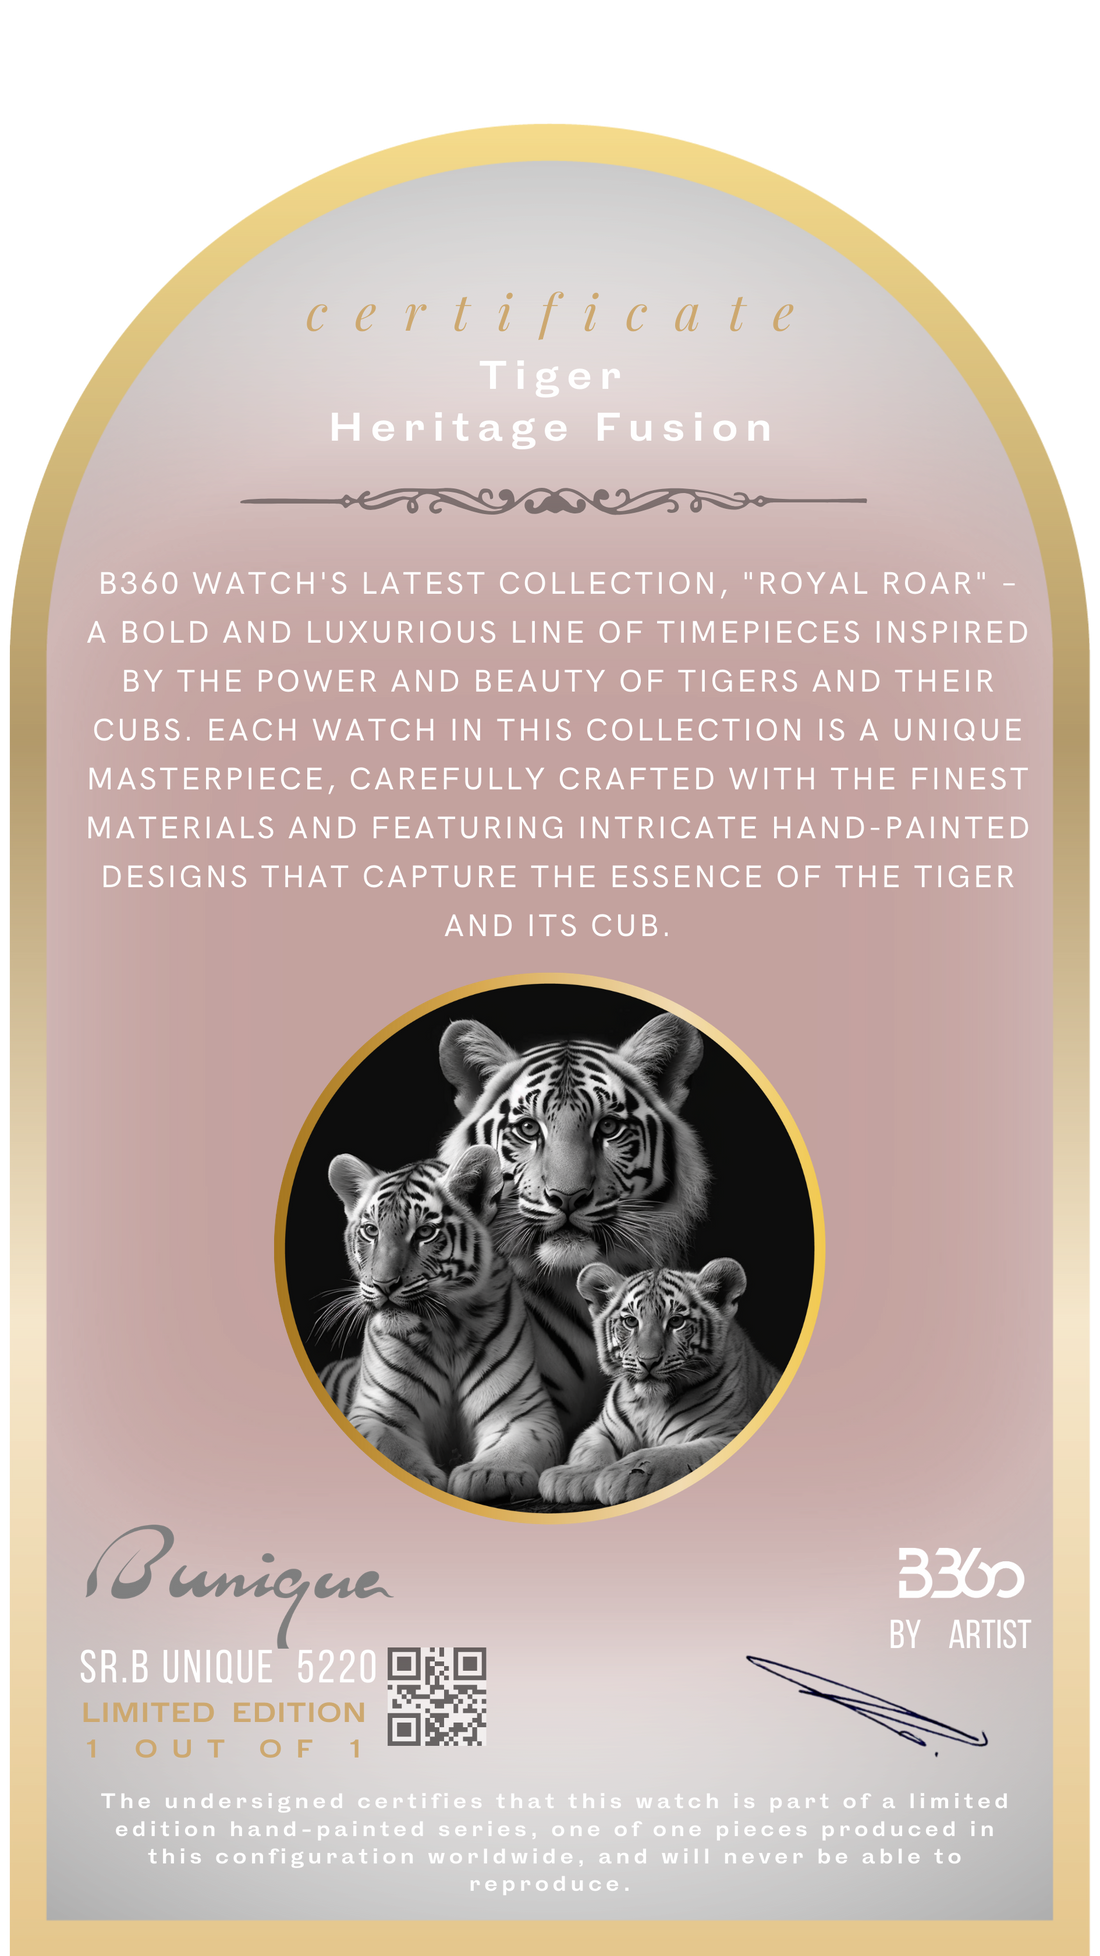 B360 Watch's Royal Roar: A Collection of Bold and Luxurious Tiger and Tiger Cub Watches